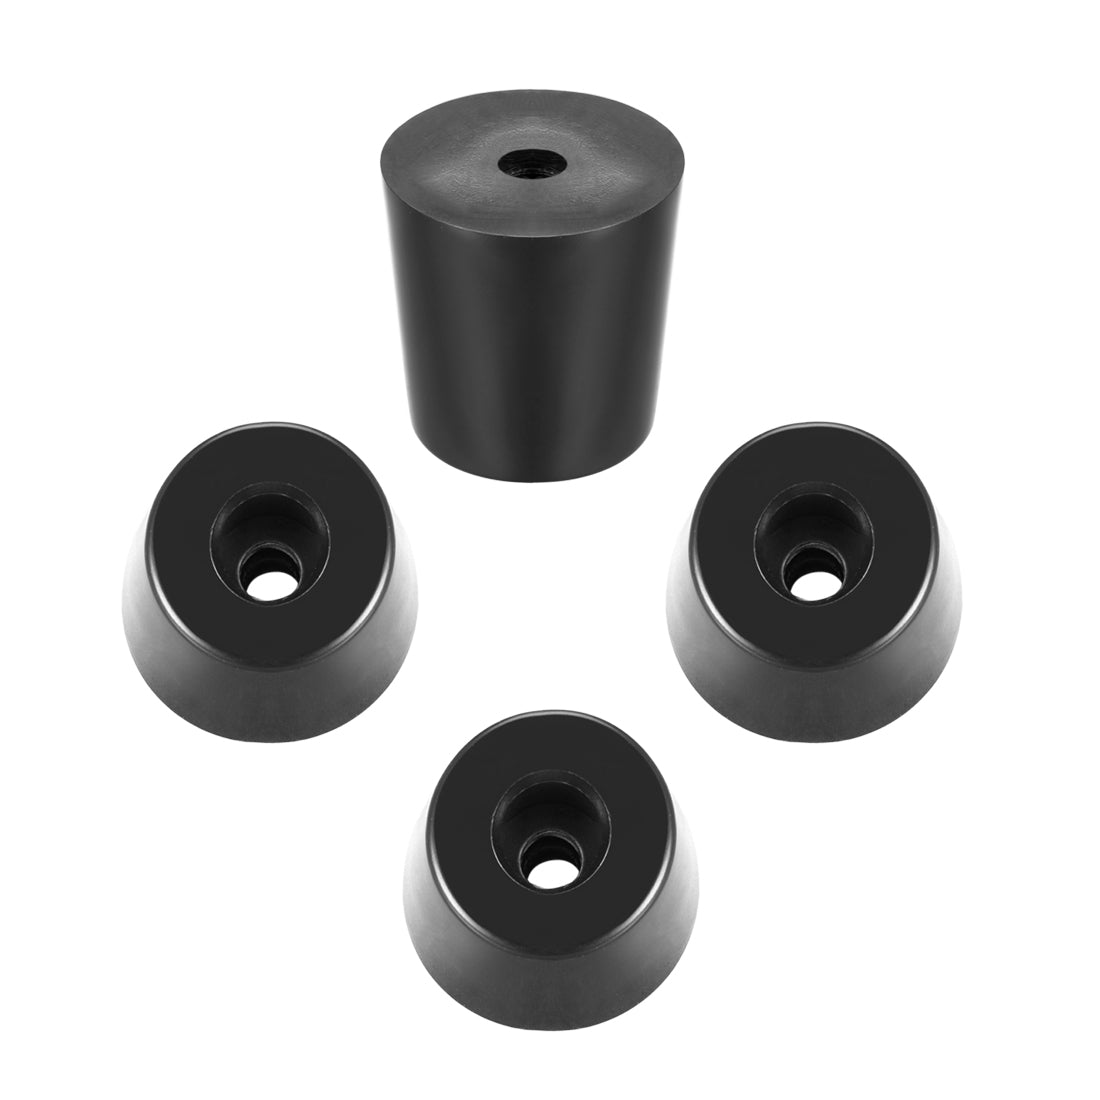 uxcell Uxcell Rubber Feet Bumpers Pads D33x27xH33mm Black 4pcs